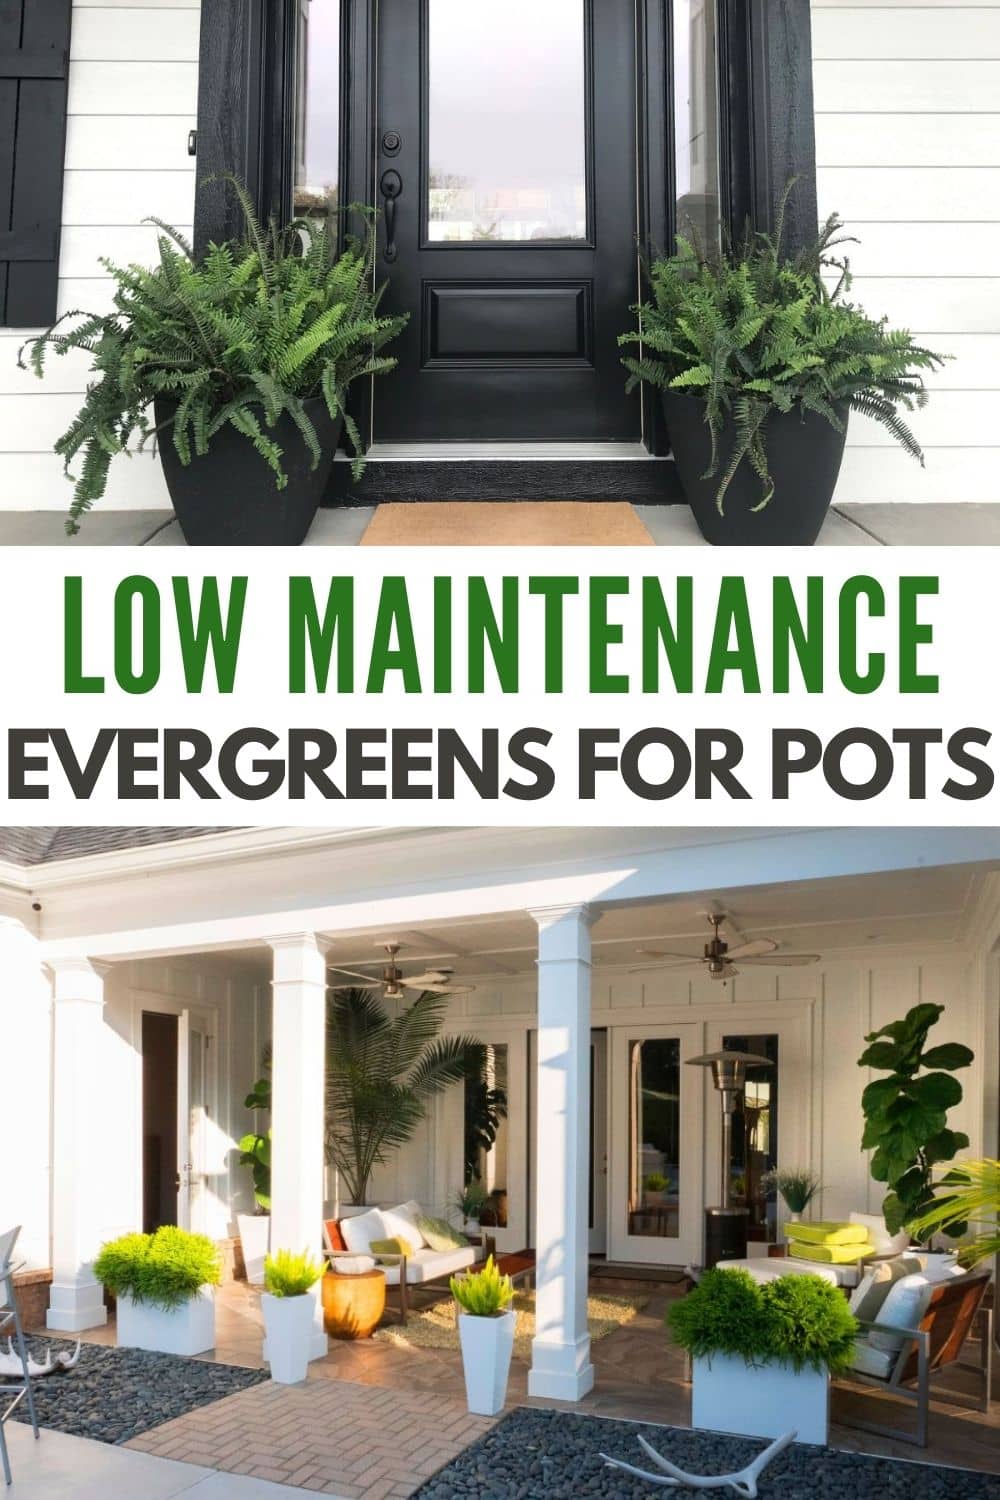 If you're looking for an easy way to add year-round greenery, then these low maintenance evergreen plants for pots are just what you need.  #lowmaintenanceevergreenplantsforpots #lowmaintenance #lowmaintenanceplants #evergreenplants #plantsforpots via @wondermomwannab